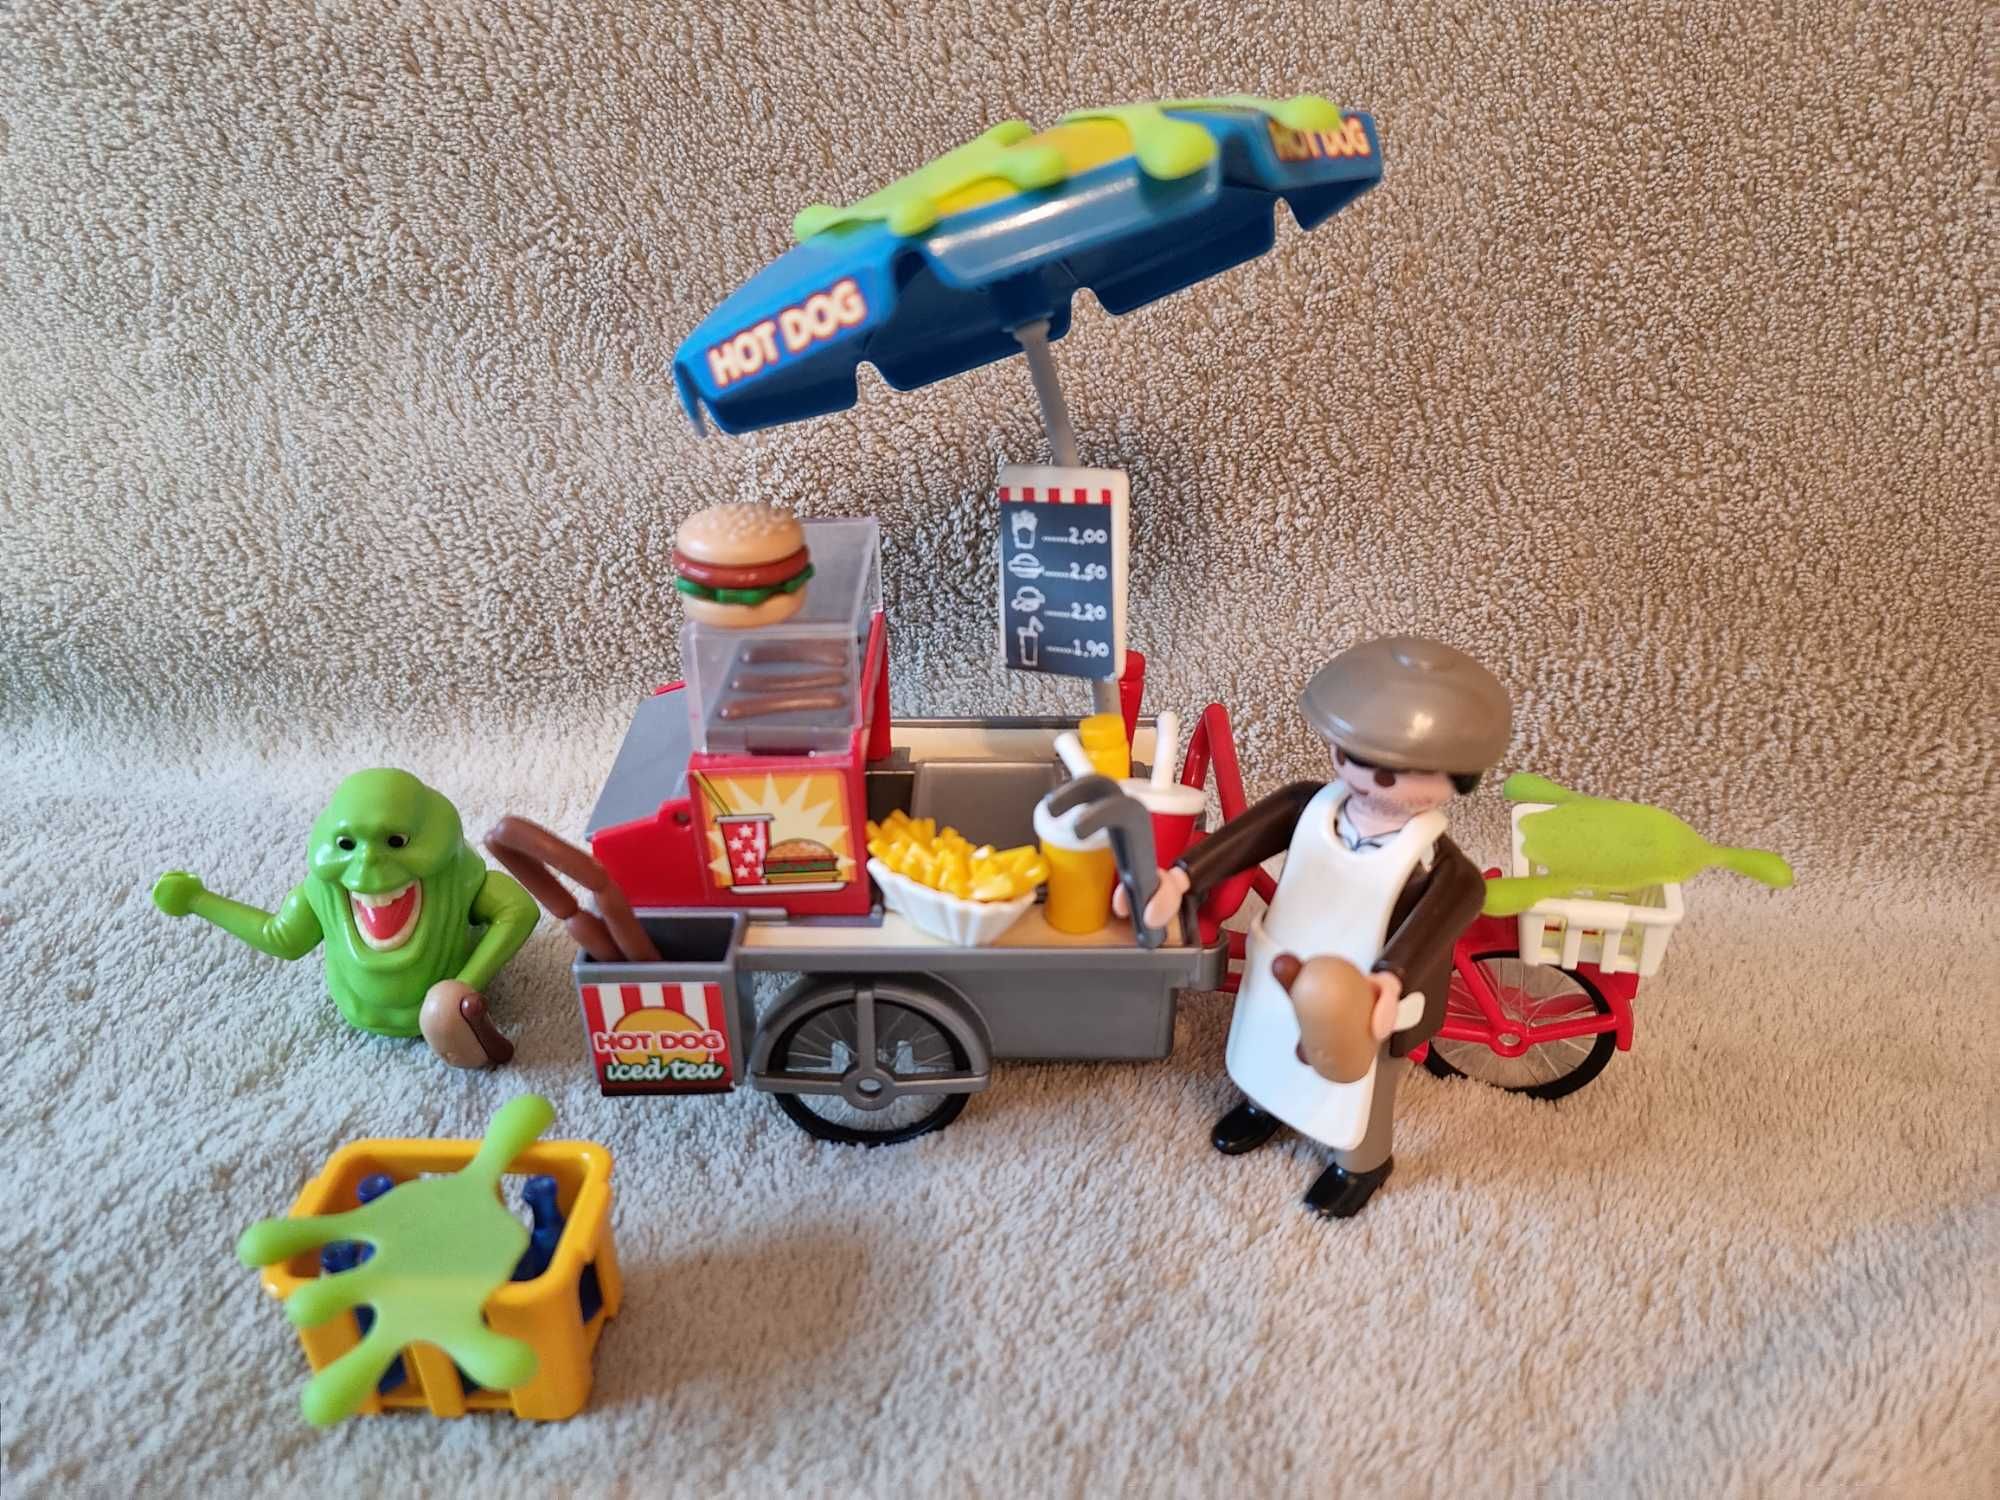 Ghostbusters - Slimmer și stand de hot dog - Playmobil